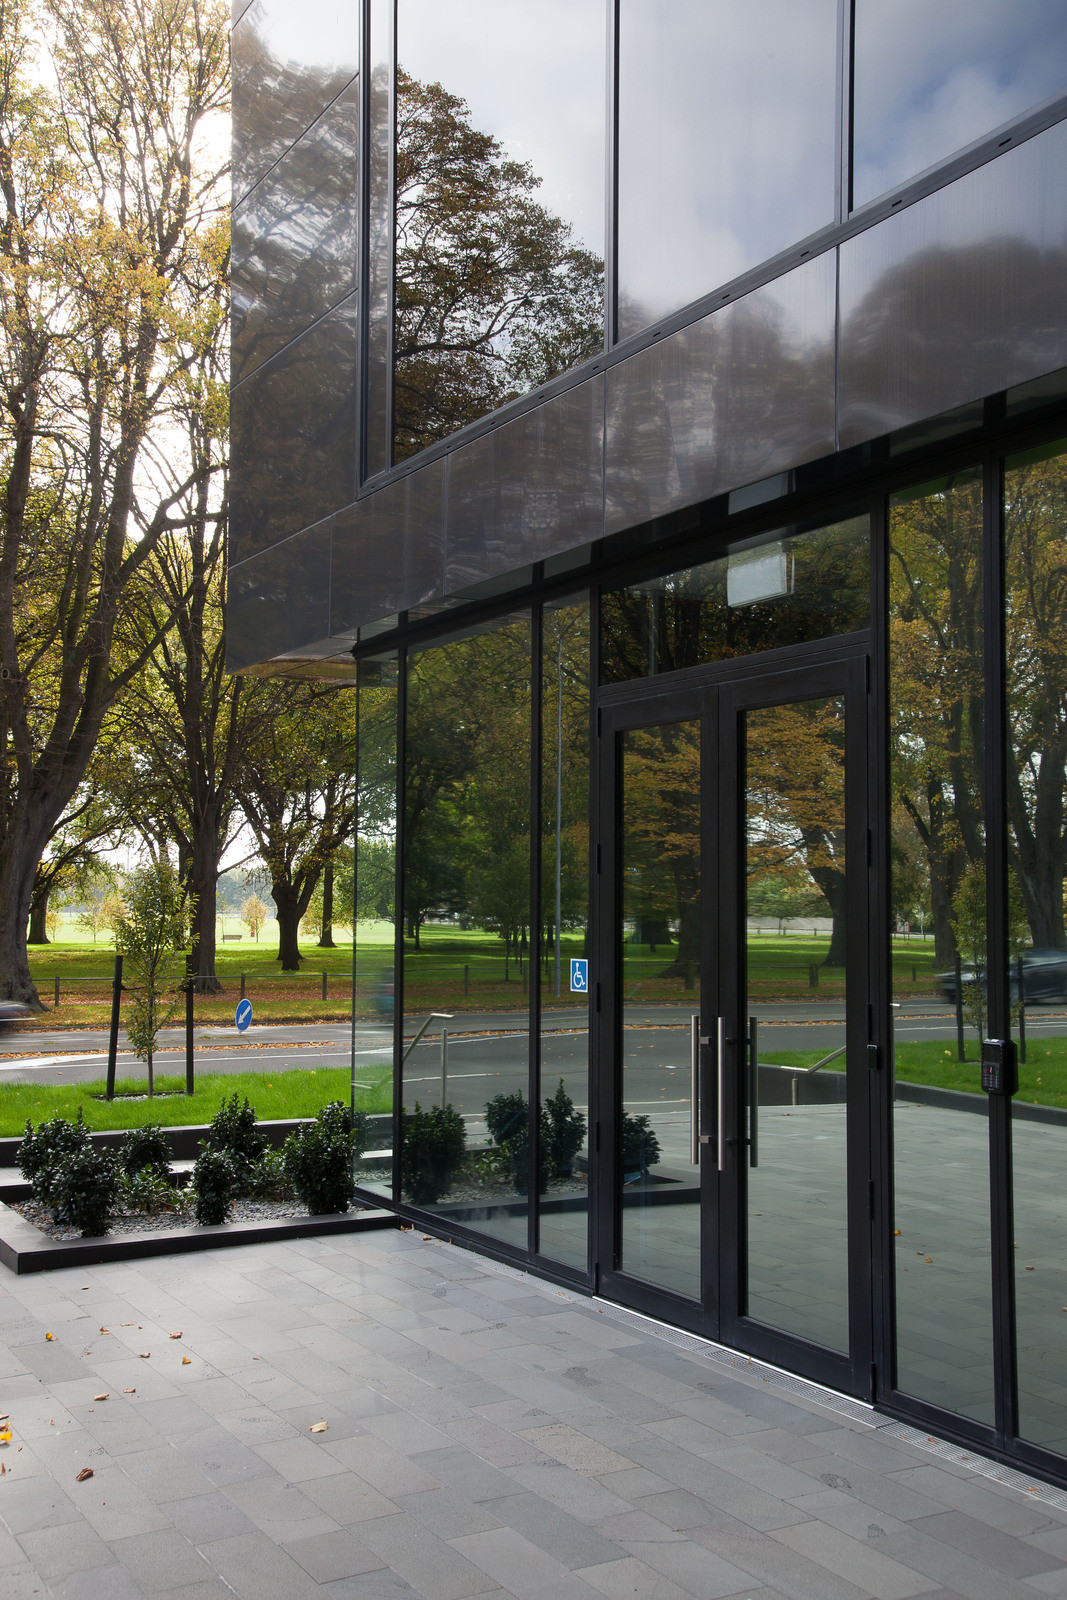 Opus house with dark tinted windows, nestled in lush green grass